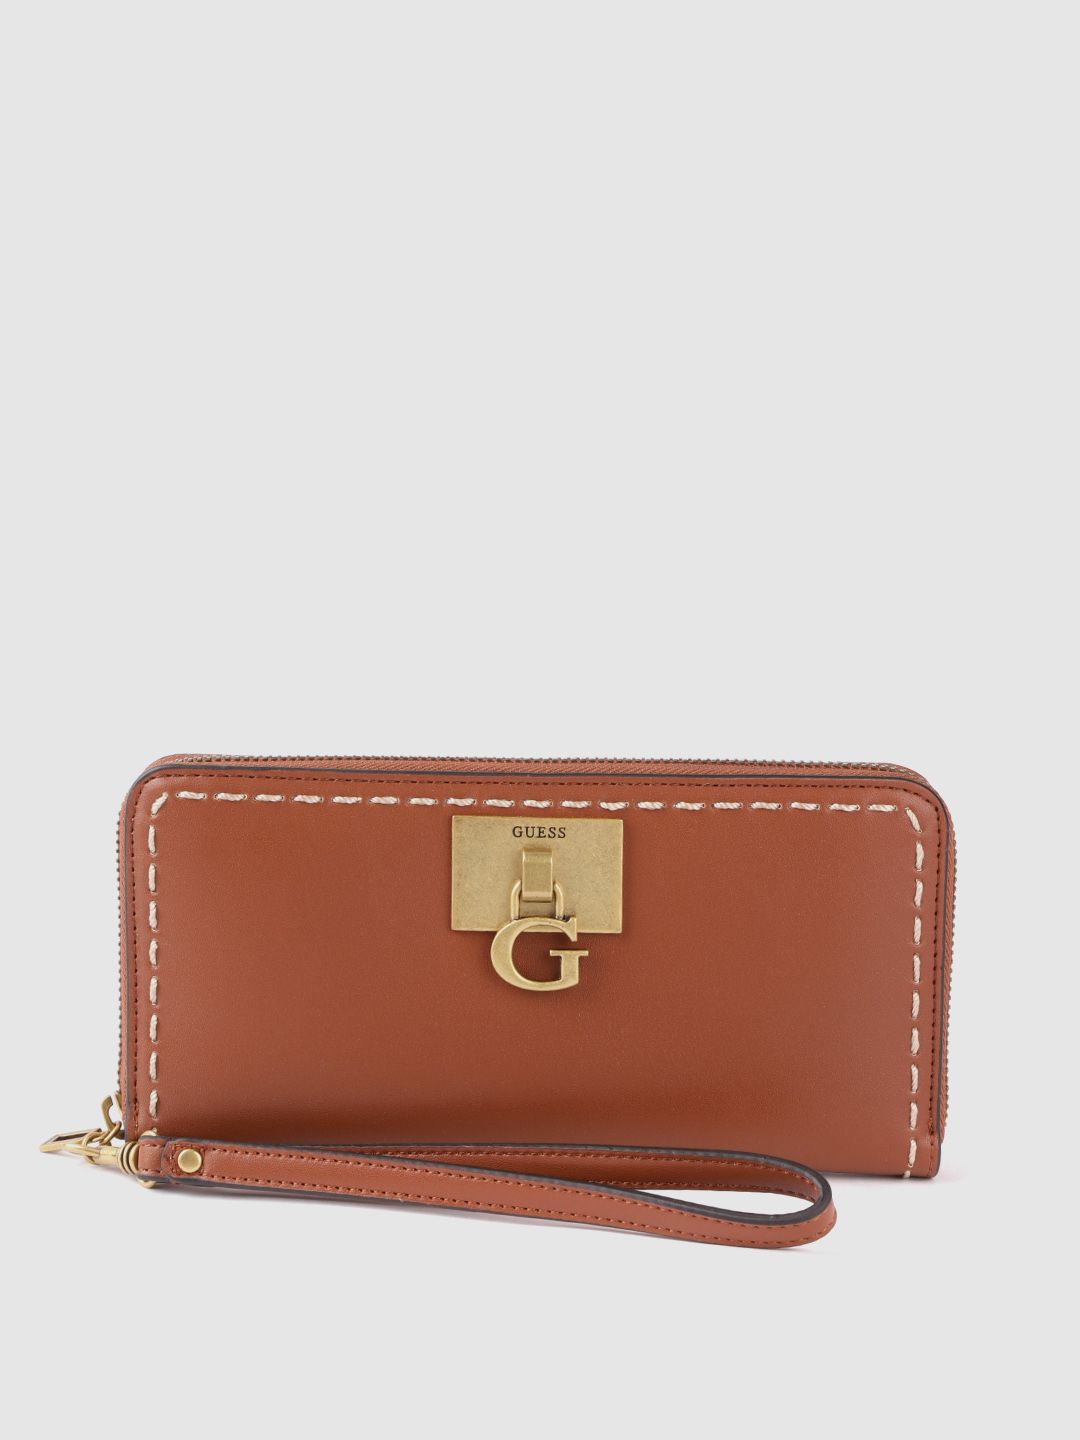 GUESS Women Tan Brown Solid Zip Around Wallet Price in India